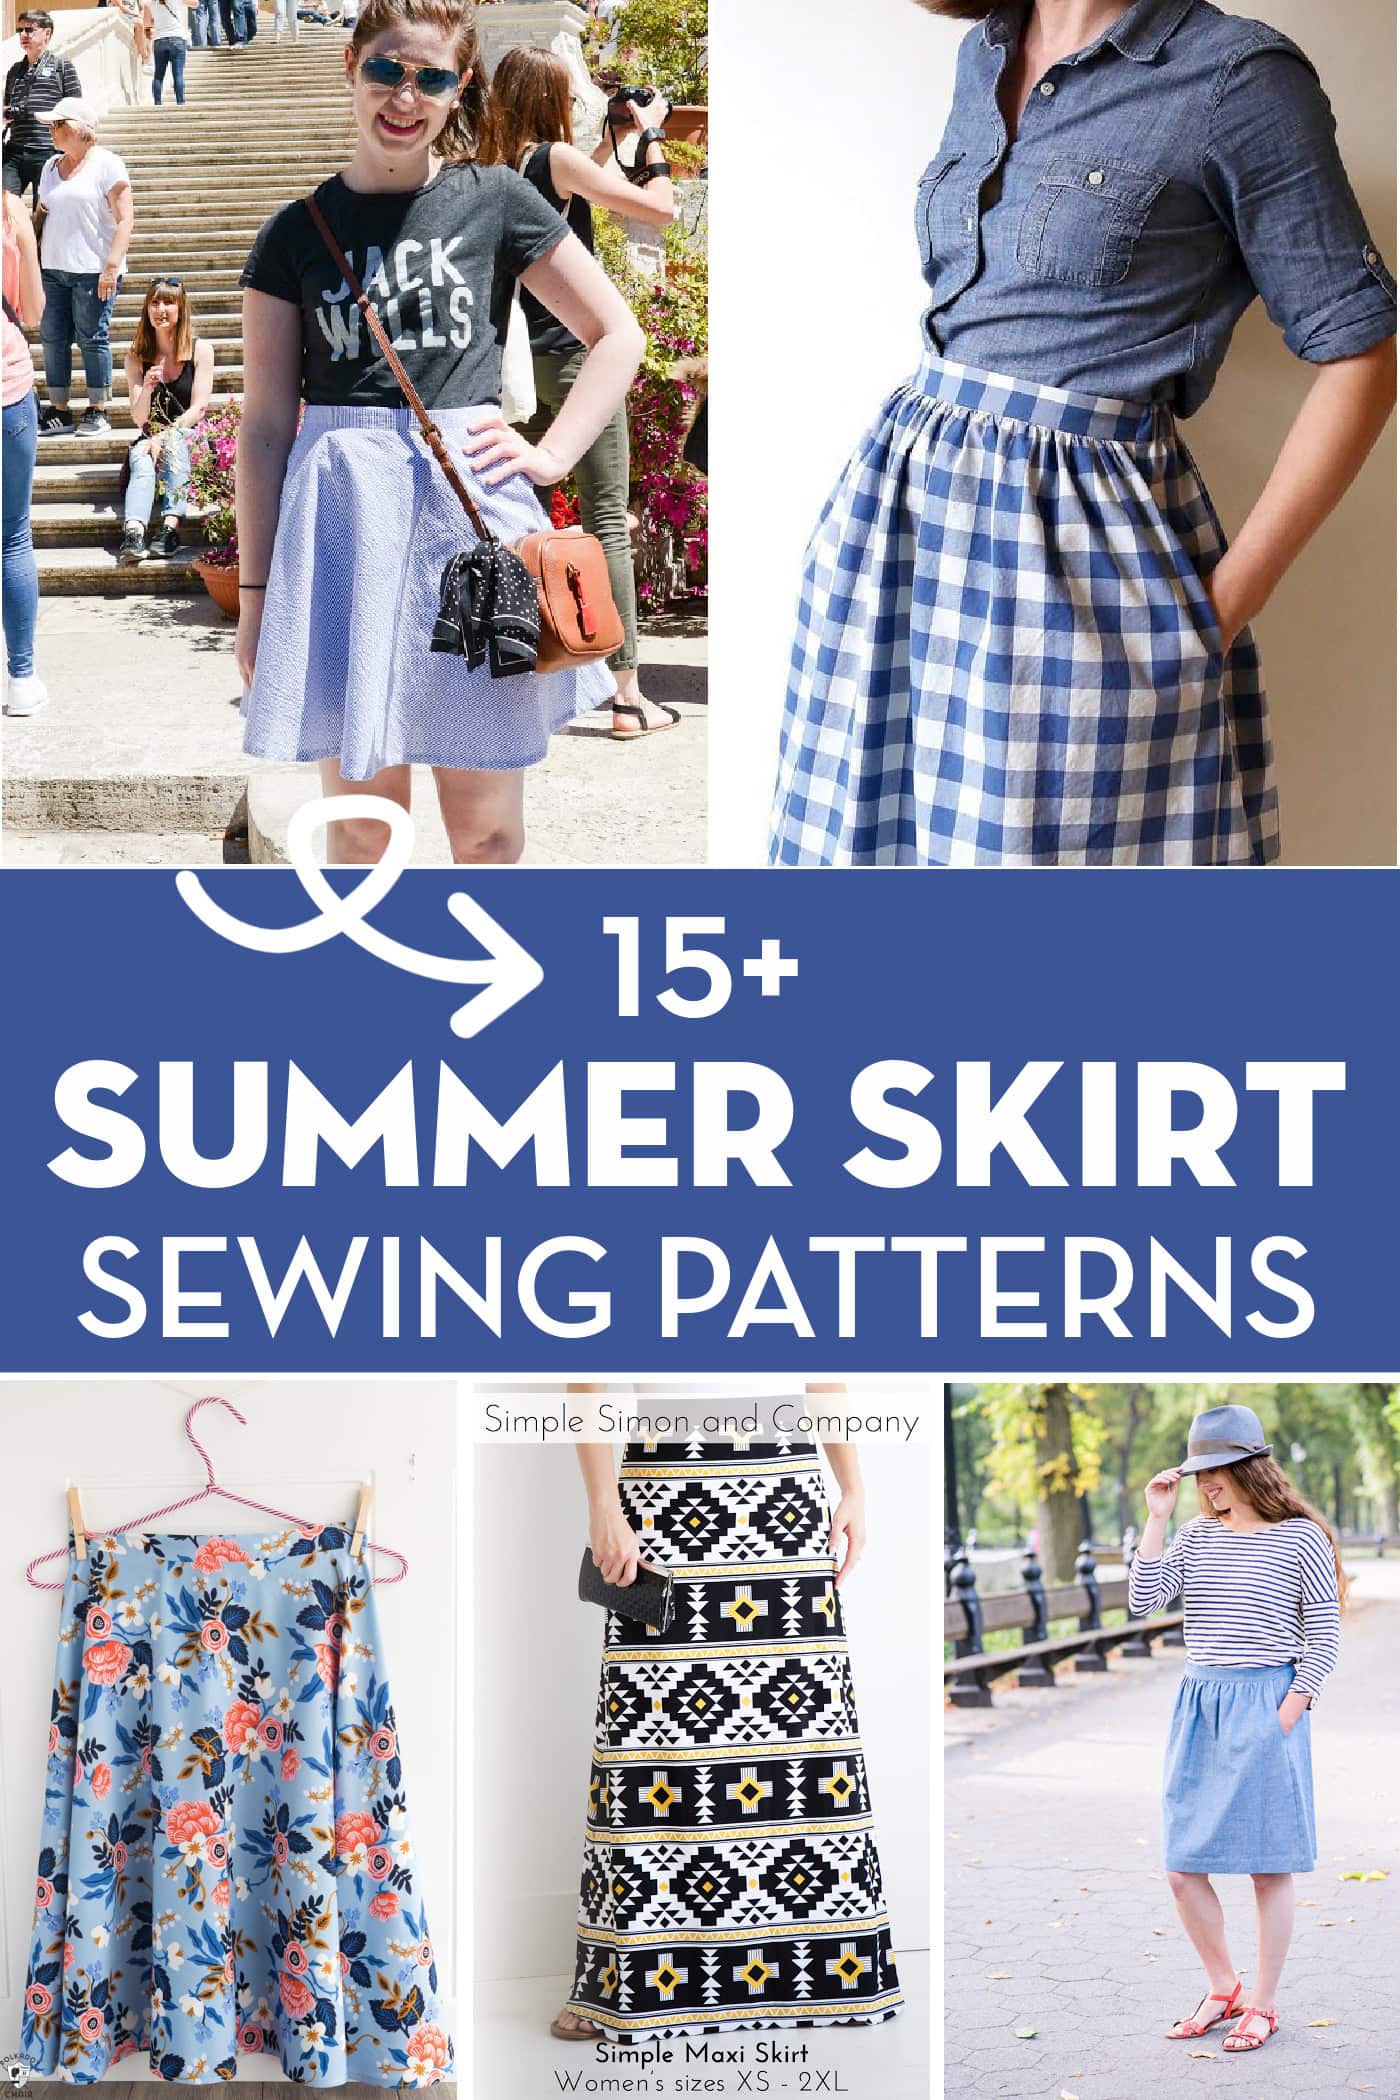 Merrick's Art // Style + Sewing for the Everyday Girl : 4 Ways to